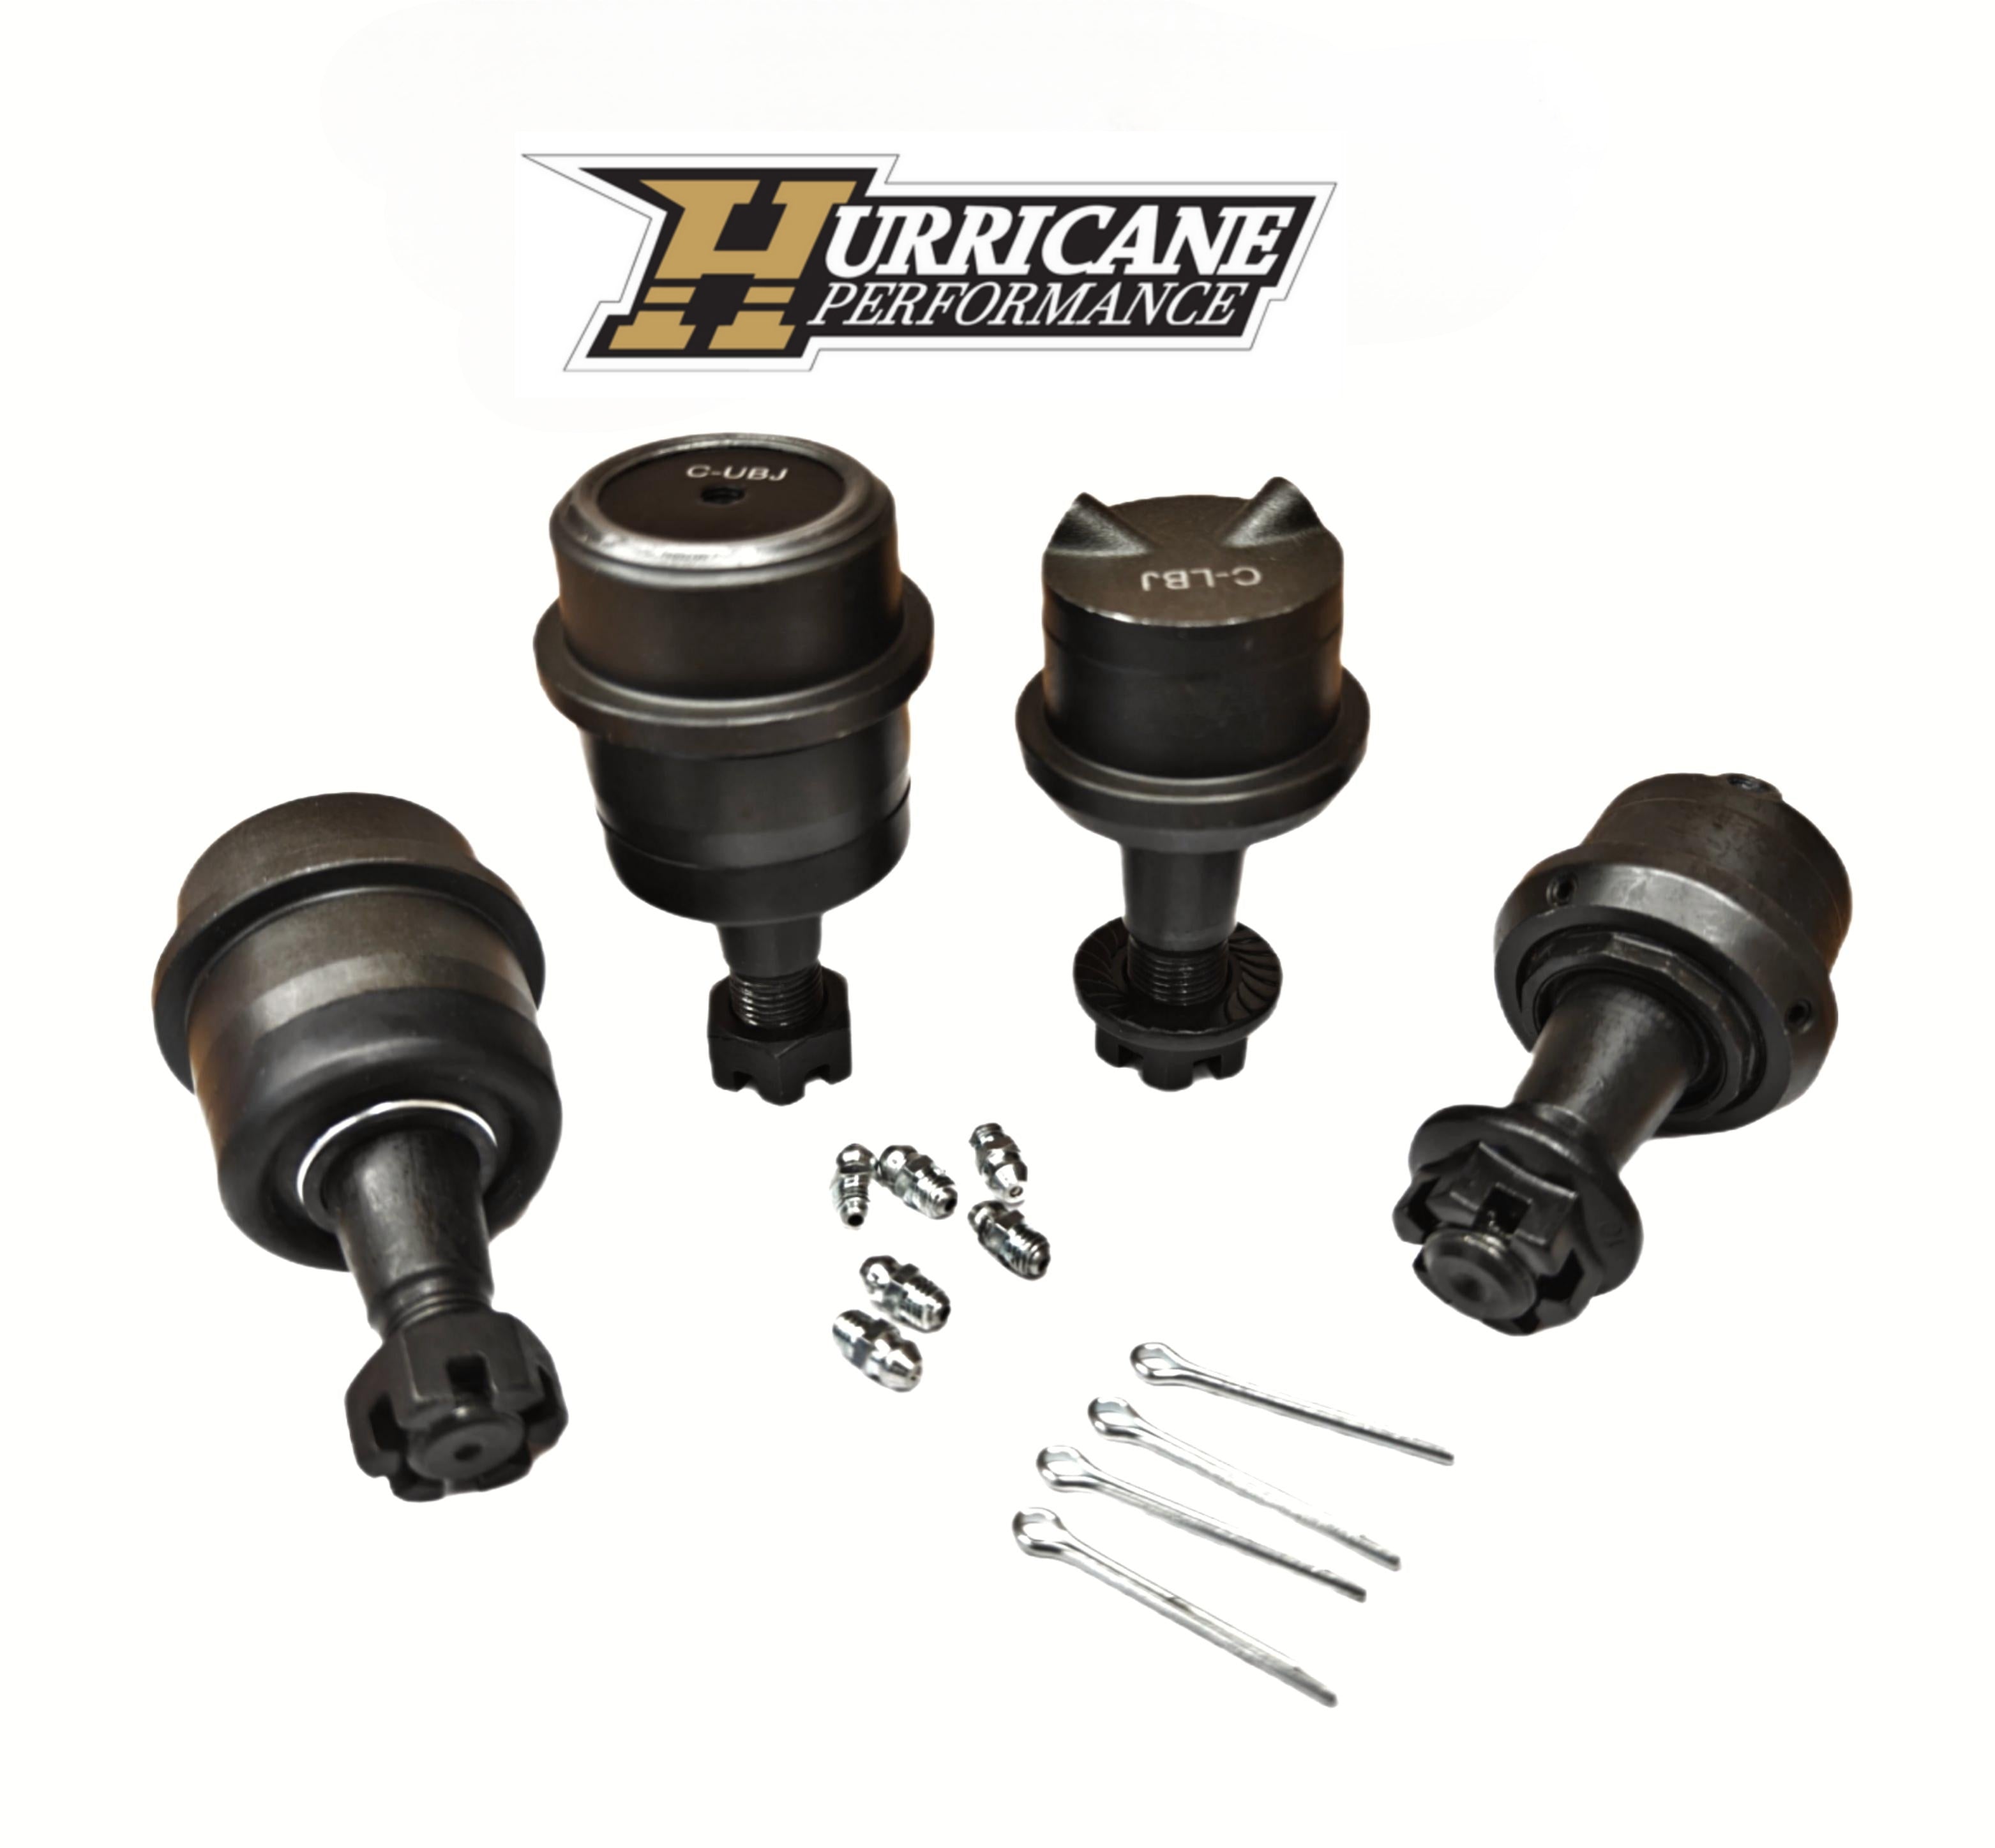 Hurricane Performance  D30 / D44 Heavy Duty Front Ball Joint Sets for Jeep Wrangler JK